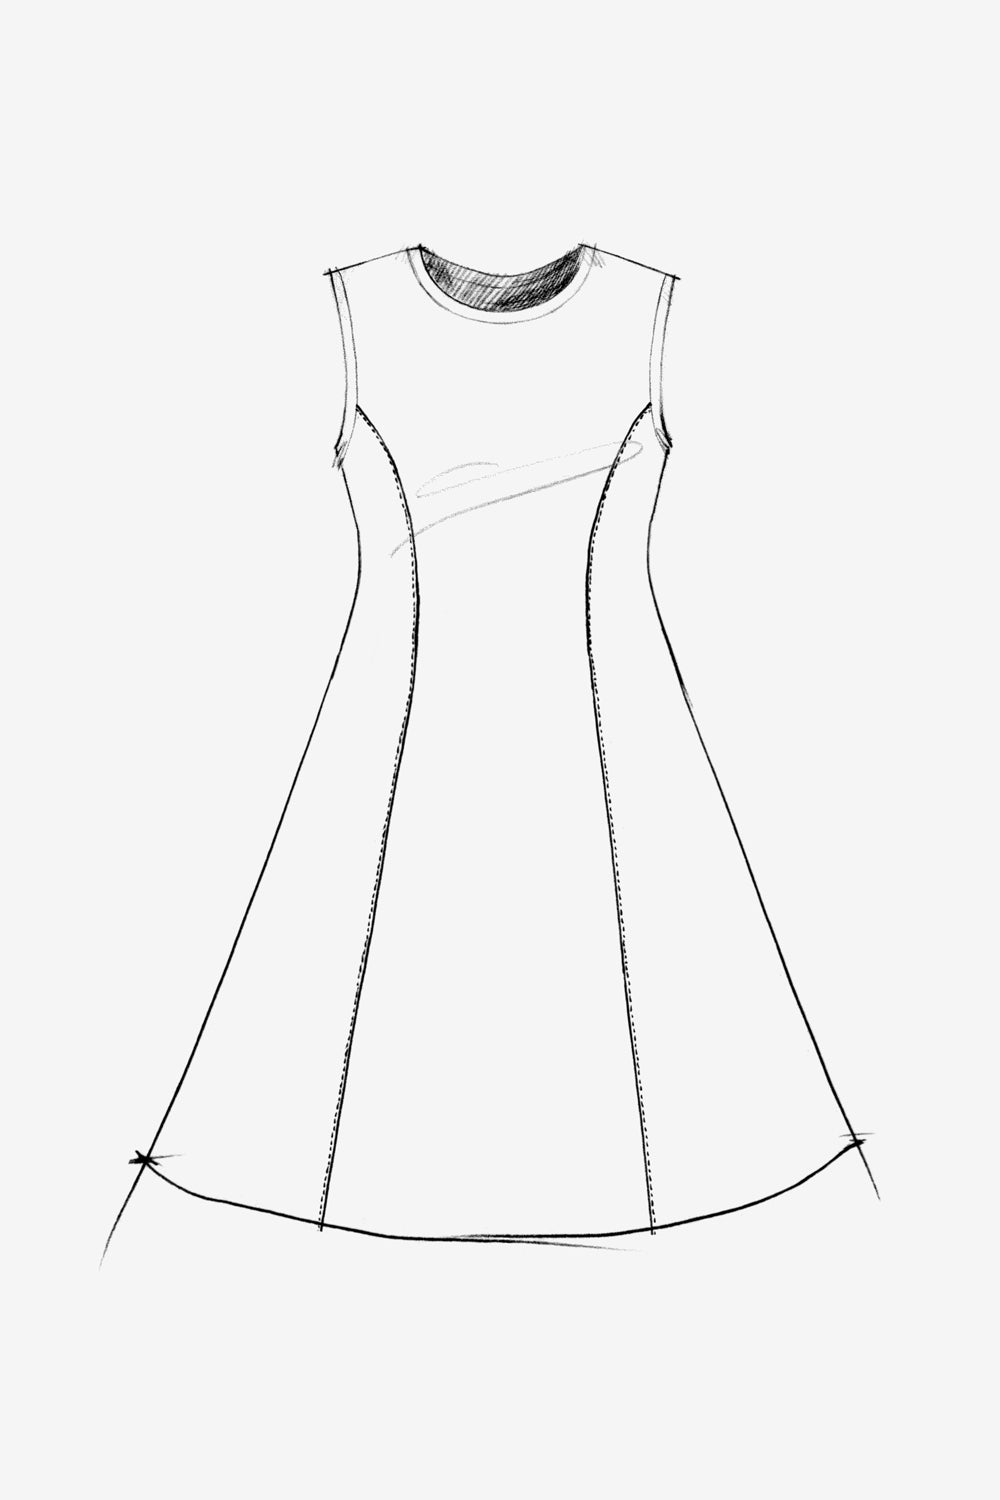 The School of Making The Factory Dress Pattern Women's DIY Clothing Pattern for Hand-Sewn Crew Neck Dress